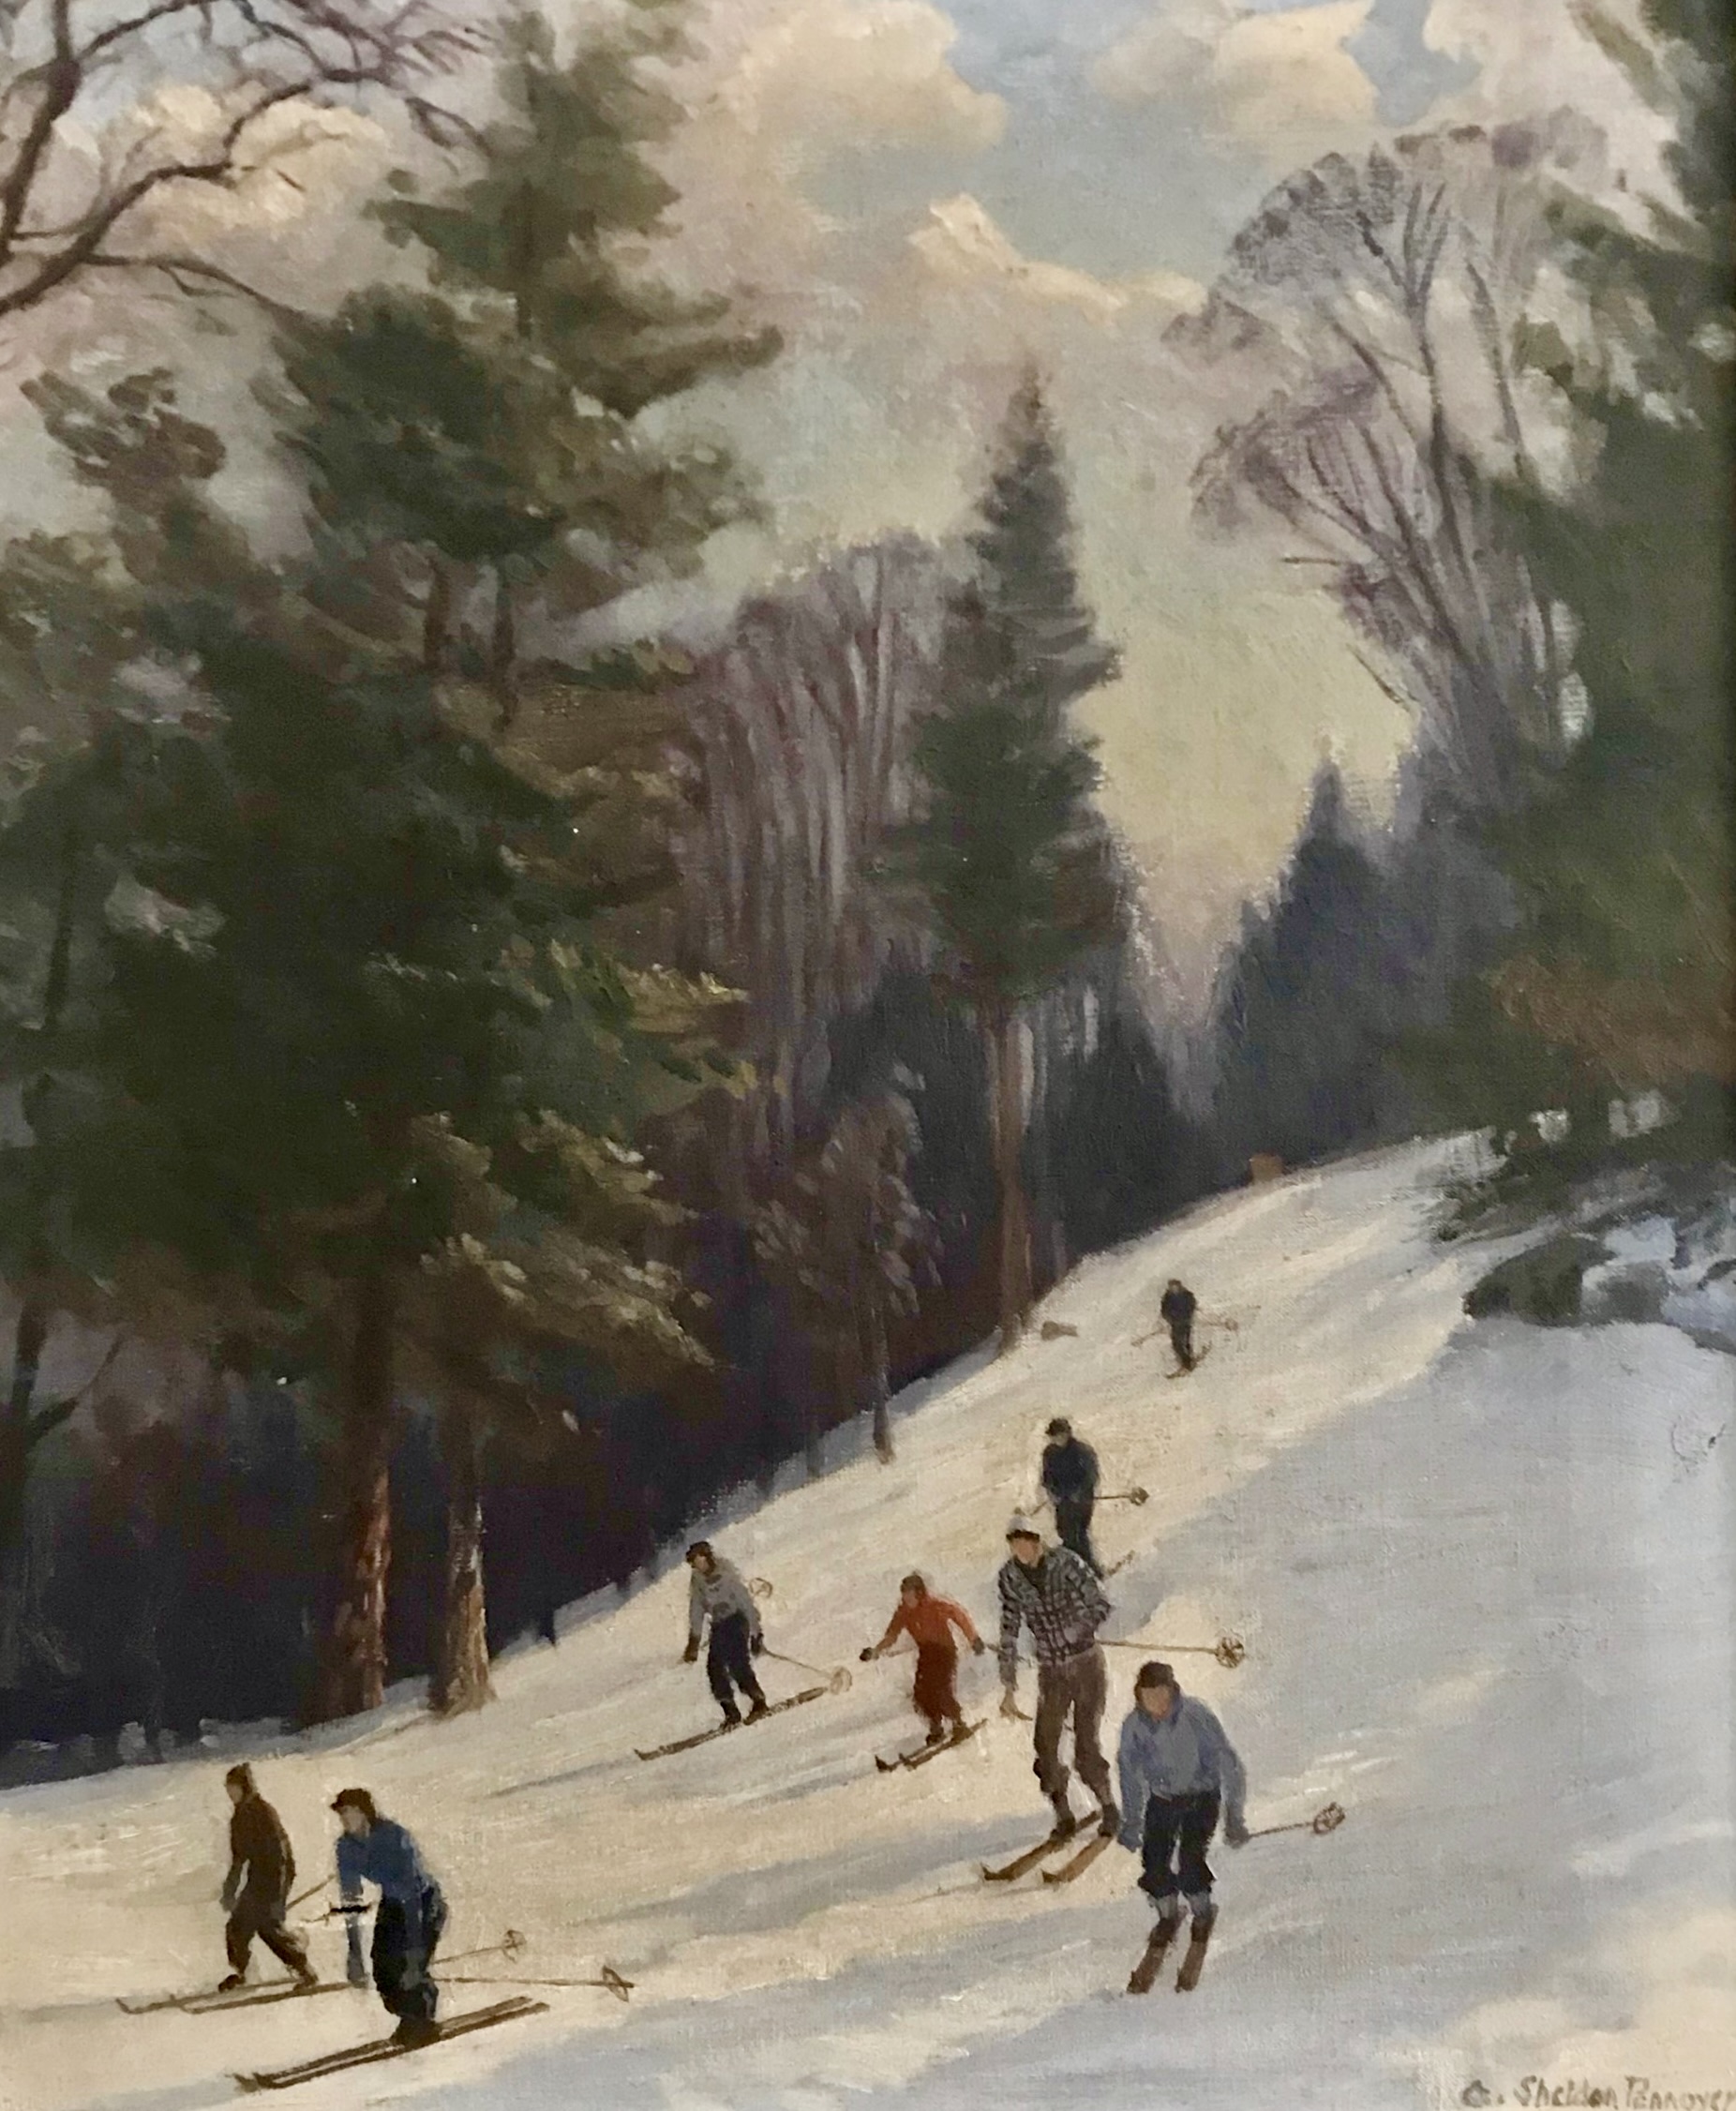 Painting of the School Forest Ski Hill